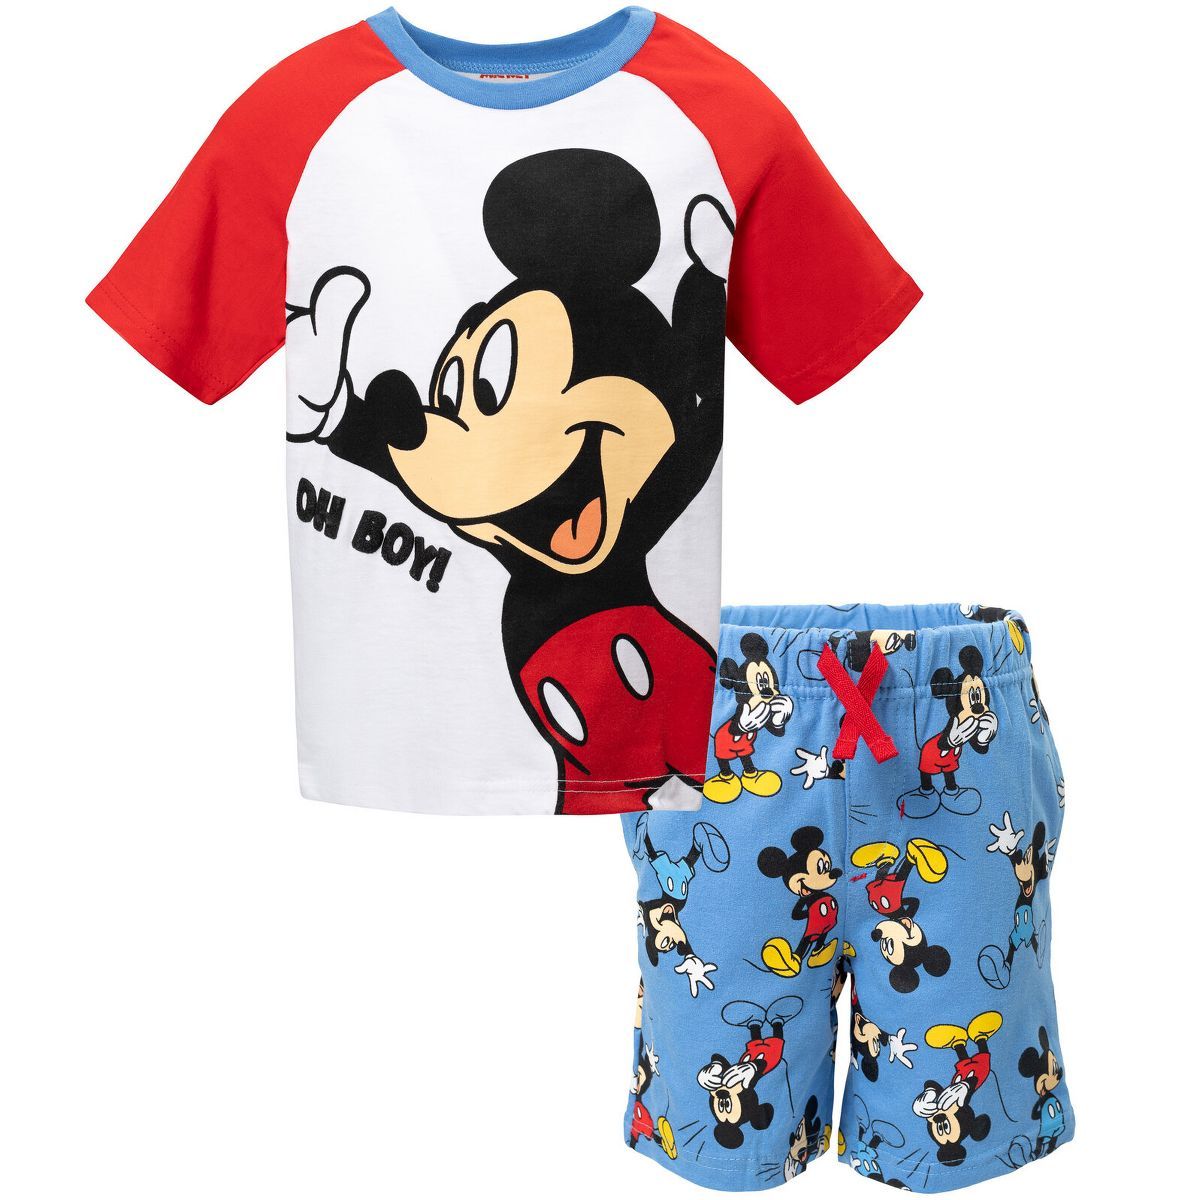 Disney Pixar Toy Story Buzz Lightyear T-Shirt and French Terry Shorts Outfit Set Toddler | Target